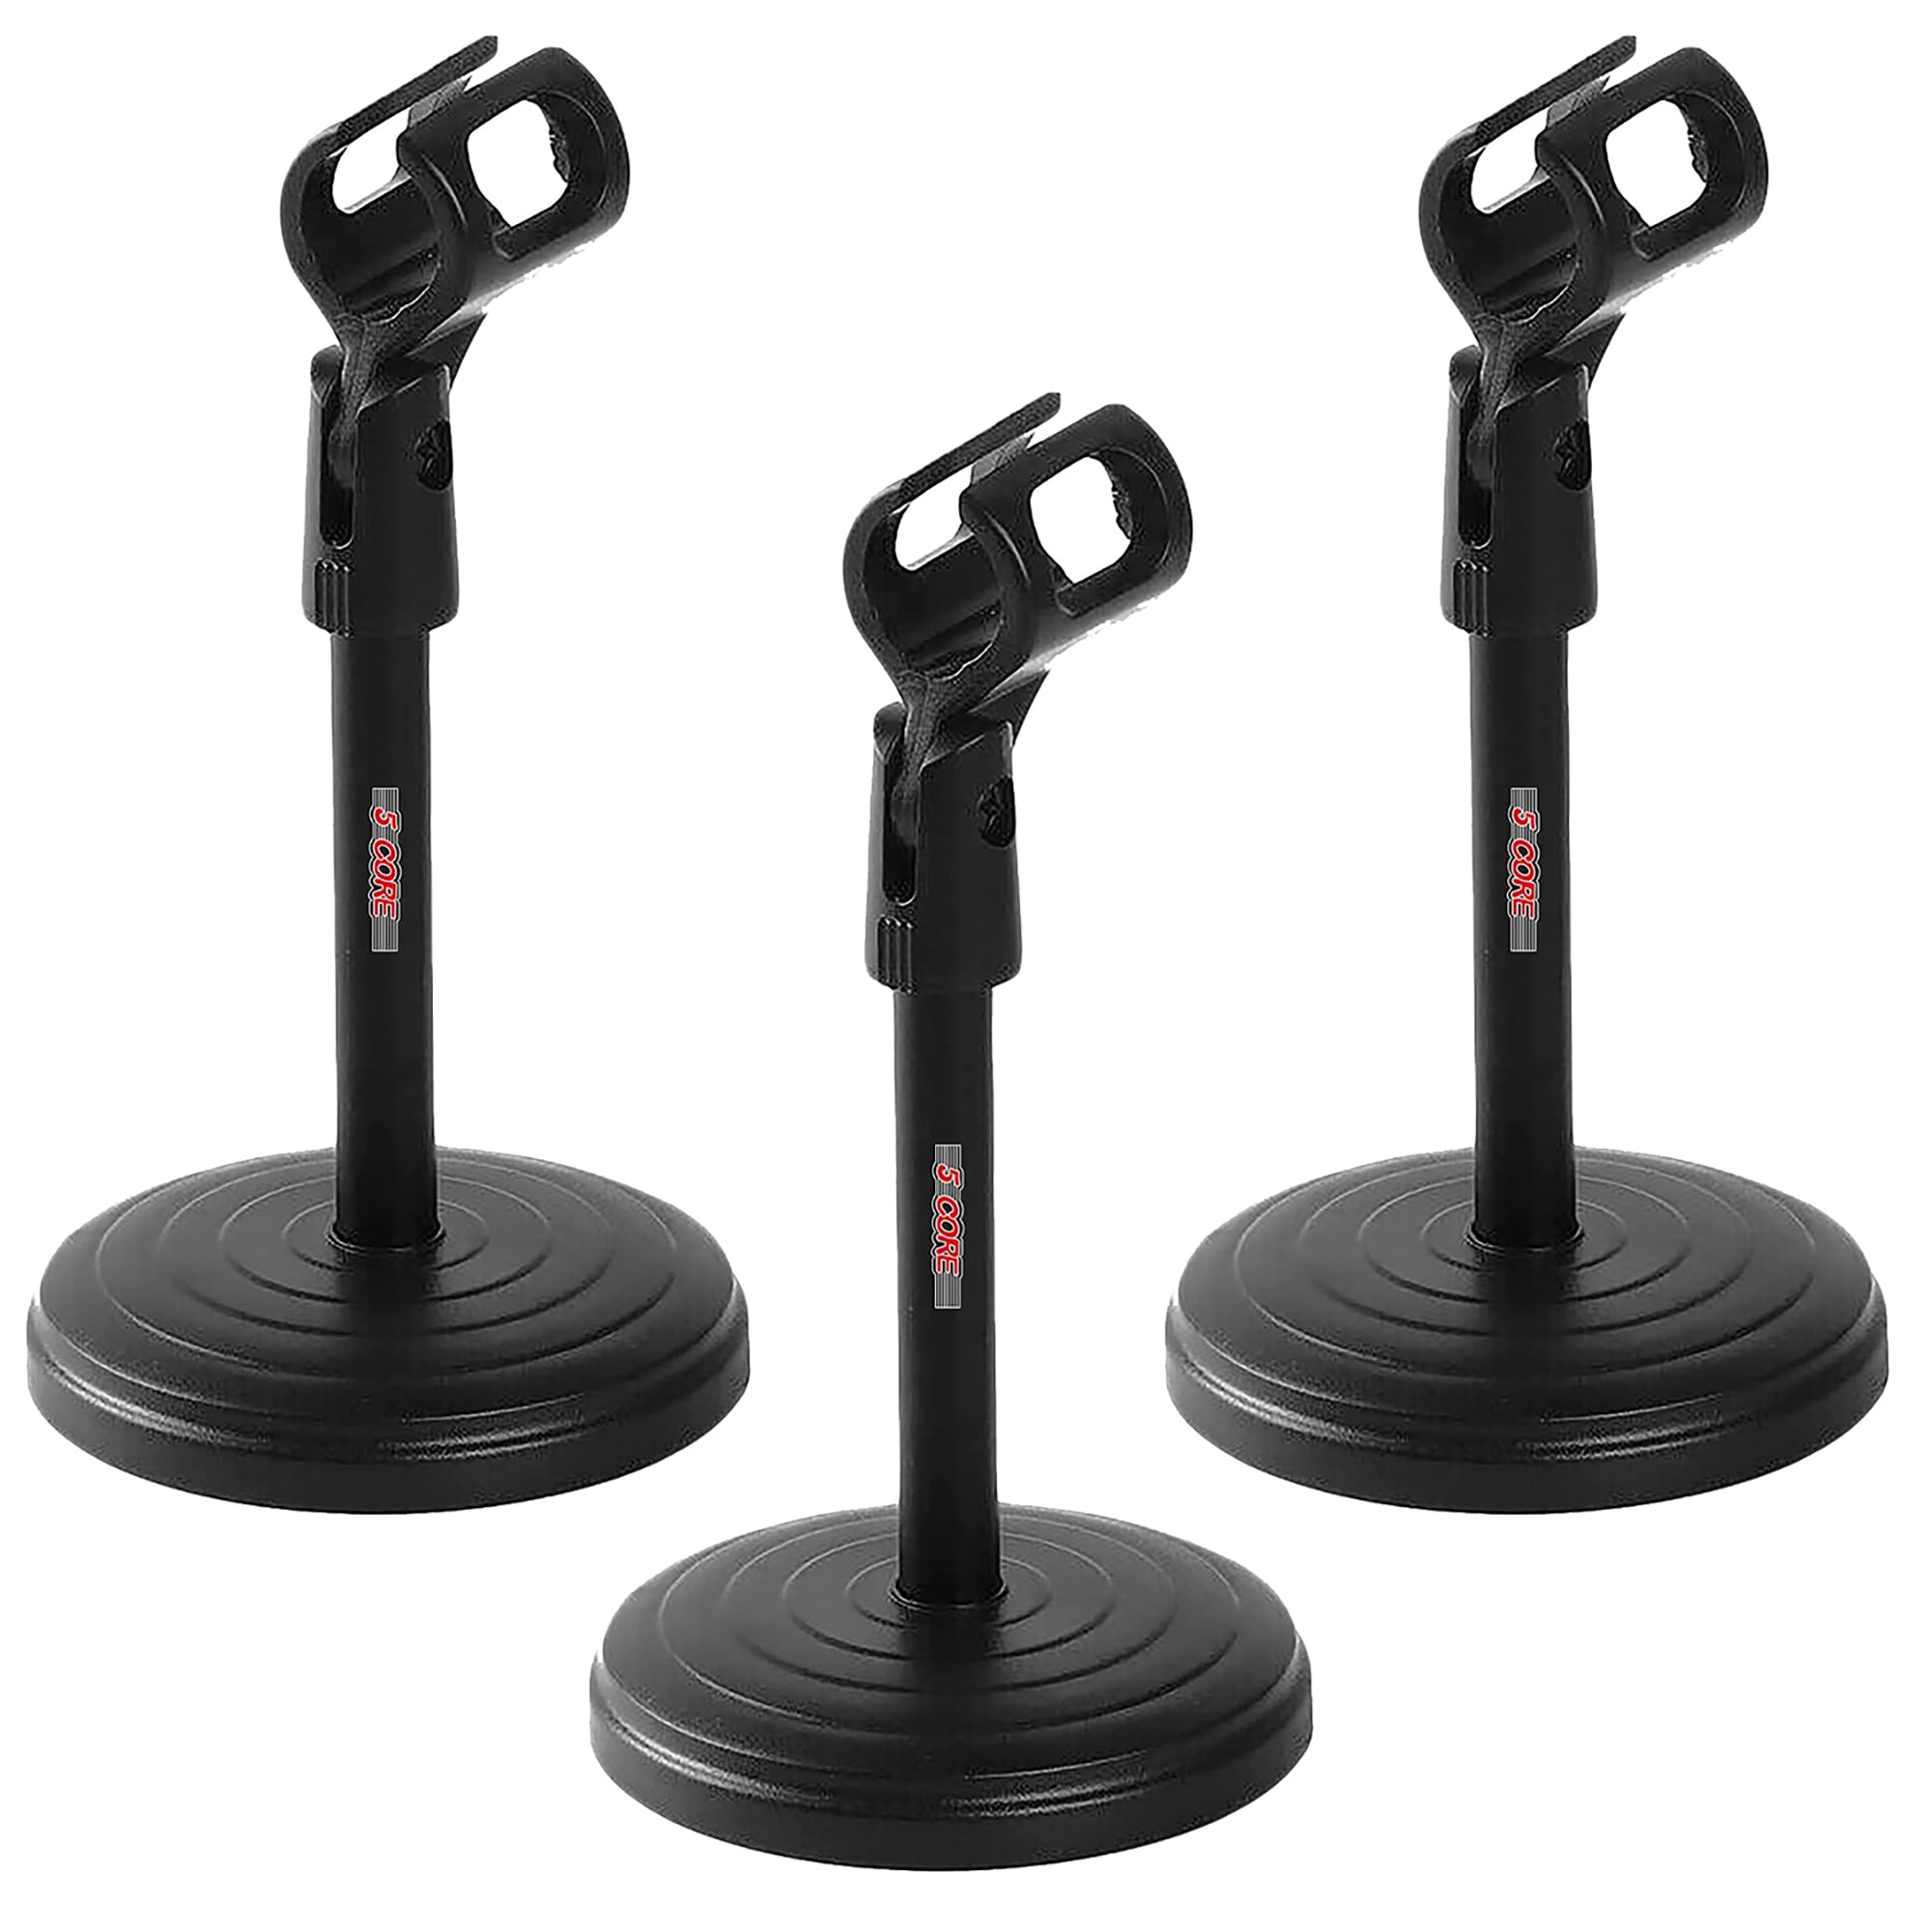 5 Core Desk Microphone Stand 3 Pack • Angle Adjustable Desktop Mic Stand with Universal Mic Clip